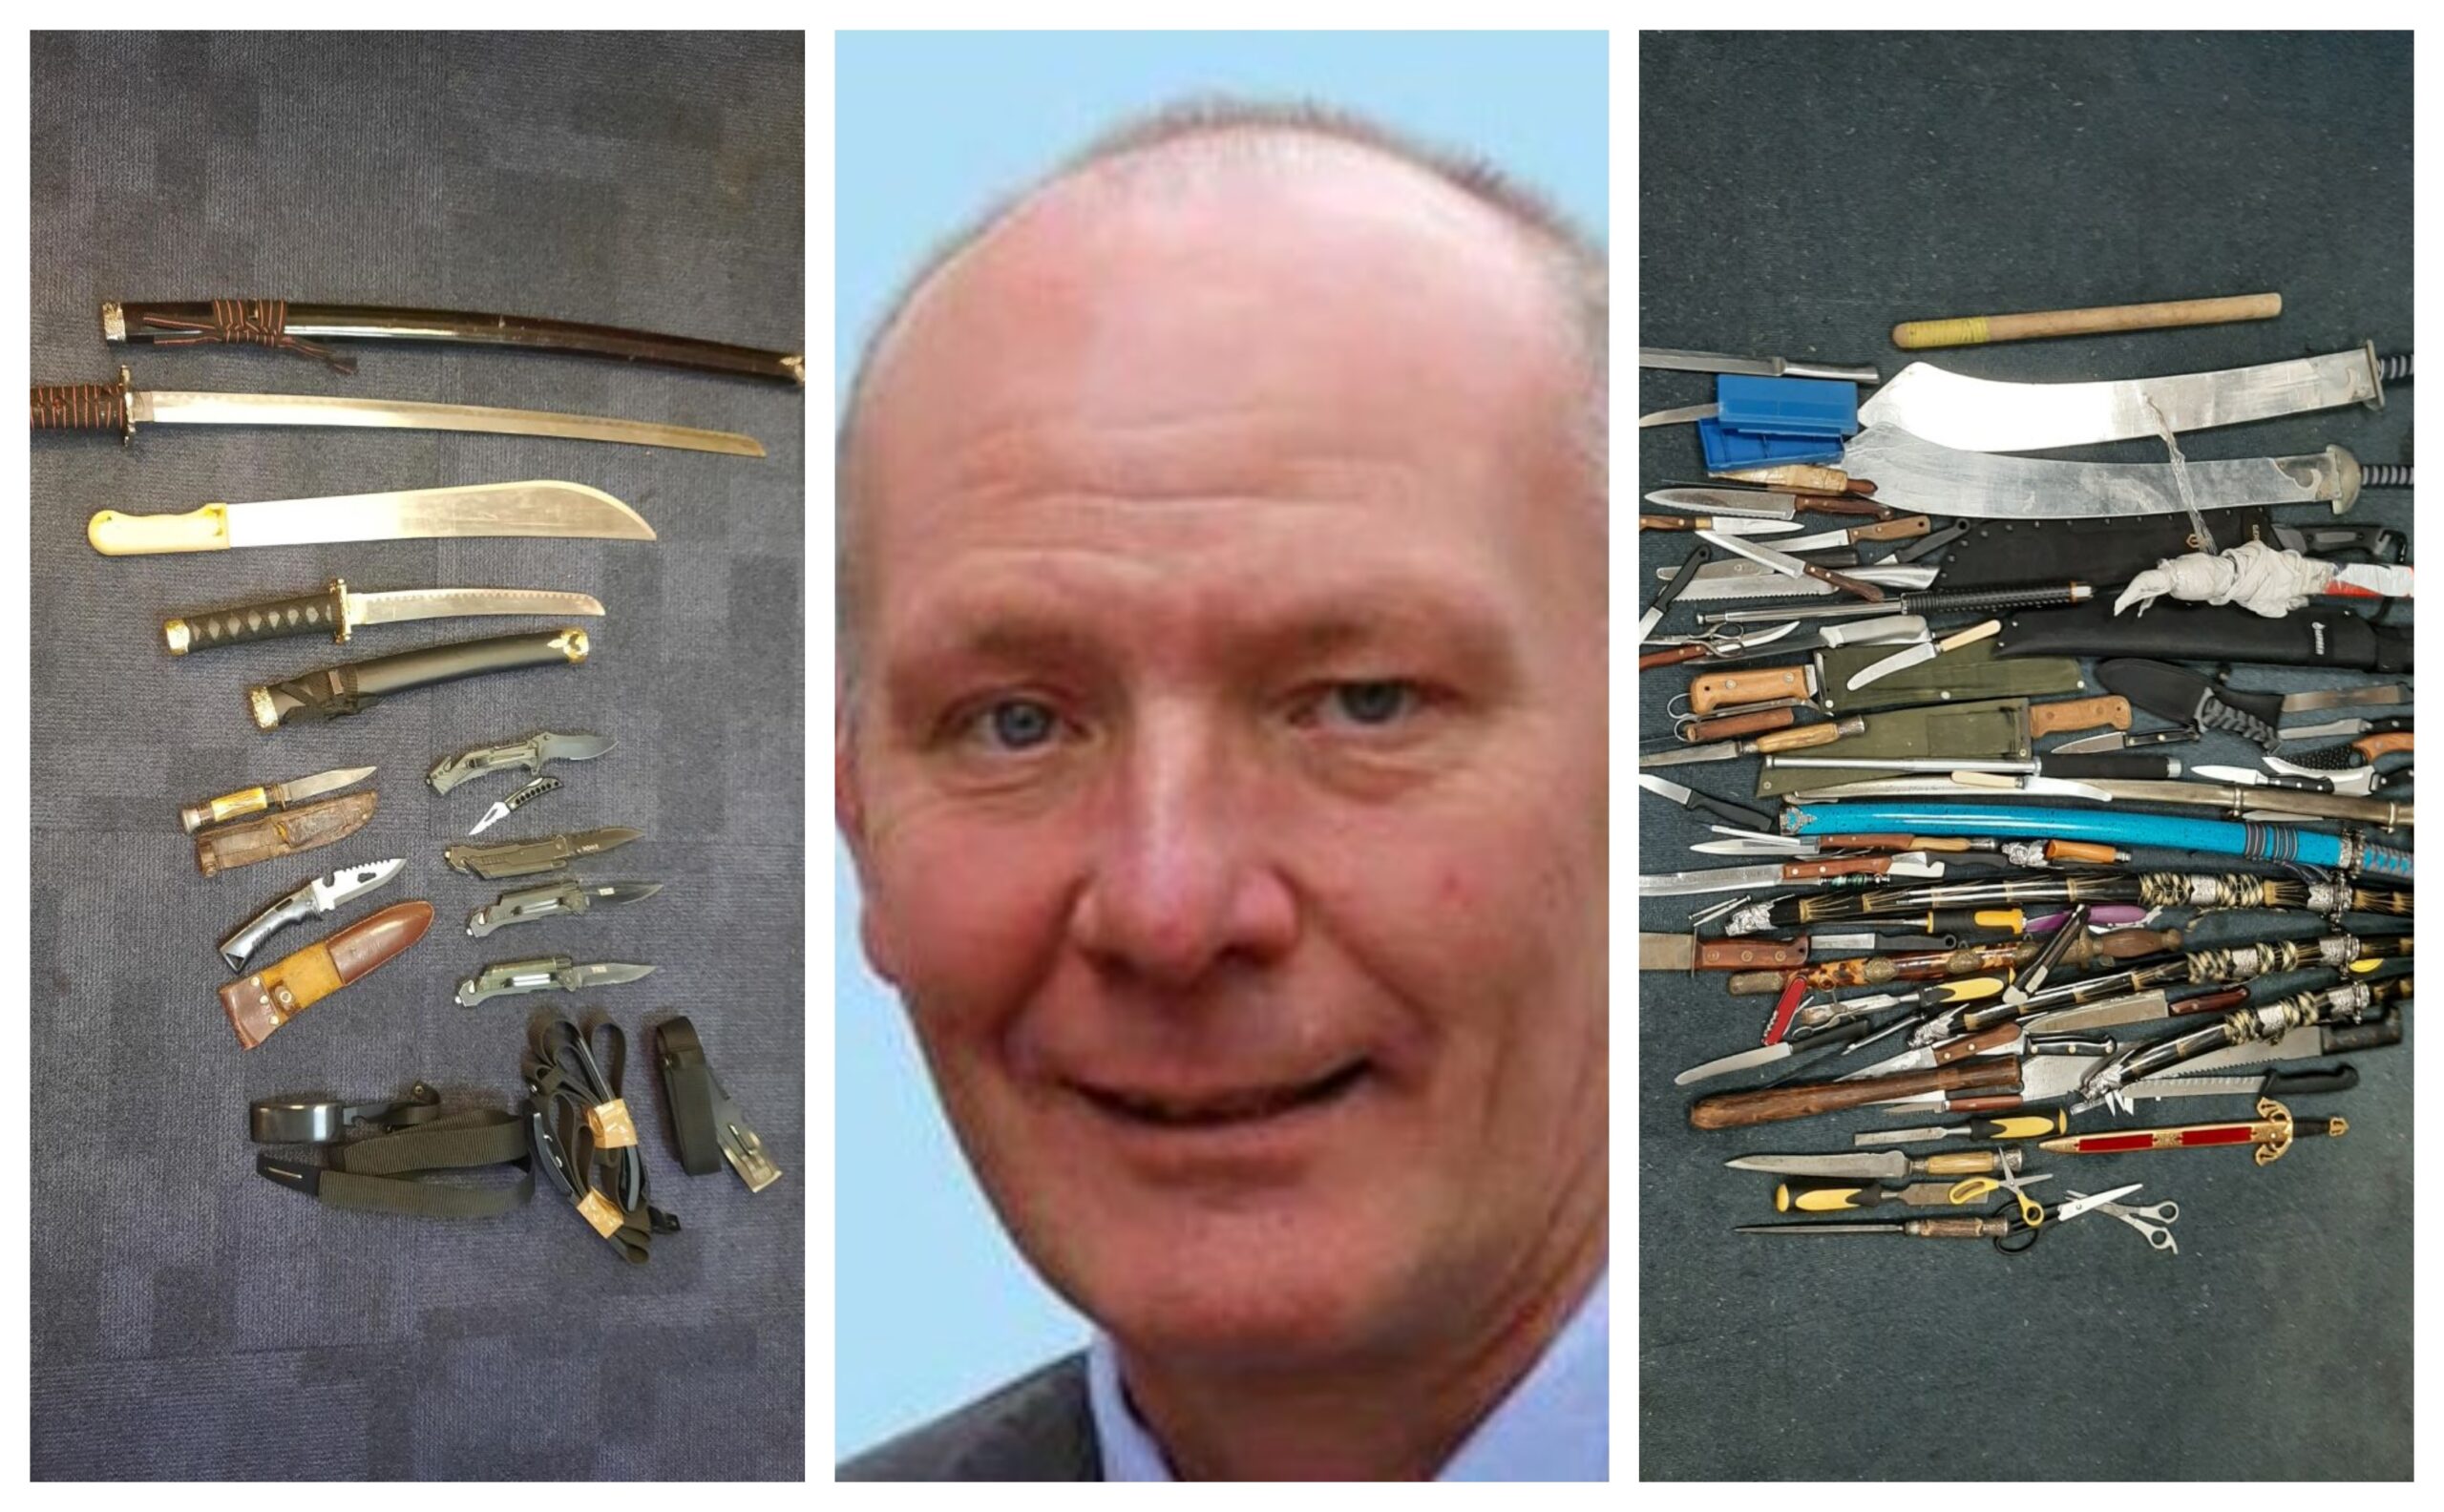 Police and Crime Commissioner Darryl Preston with amnesty weapons at Parkside police station Cambridge (left) and Thorpe Wood police station (right)